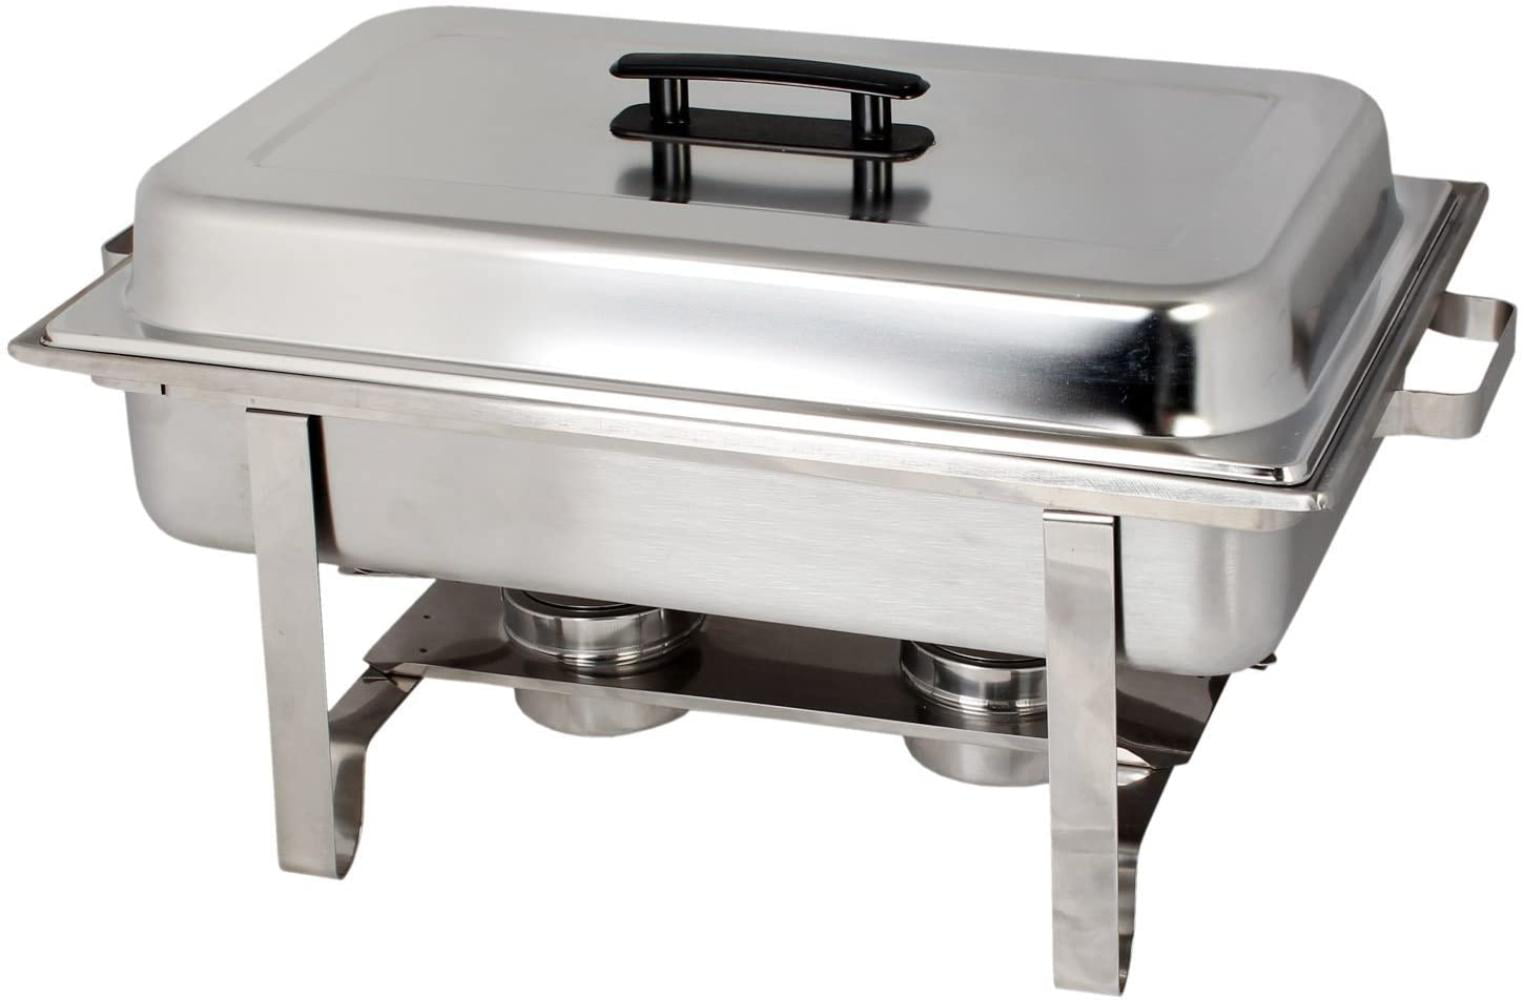 Roll Top Chafer Stainless Steel Deluxe Chafer Chafing Dish Sets 8 QT Full Size 